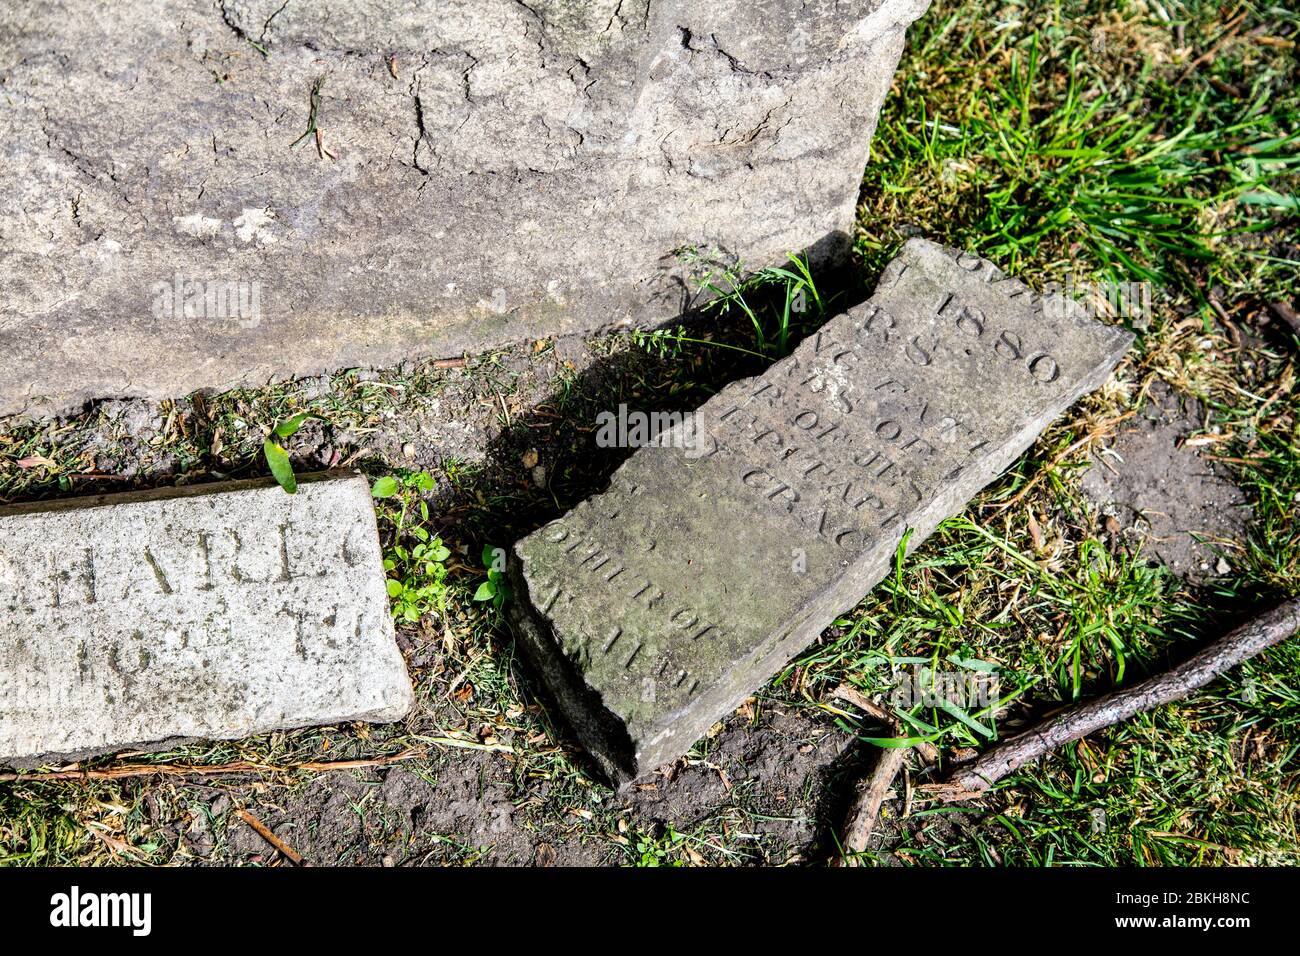 Broken pieces of headstones at former site of Stepney Meeting House Burial Ground (Mercers Burial Ground), London, UK Stock Photo